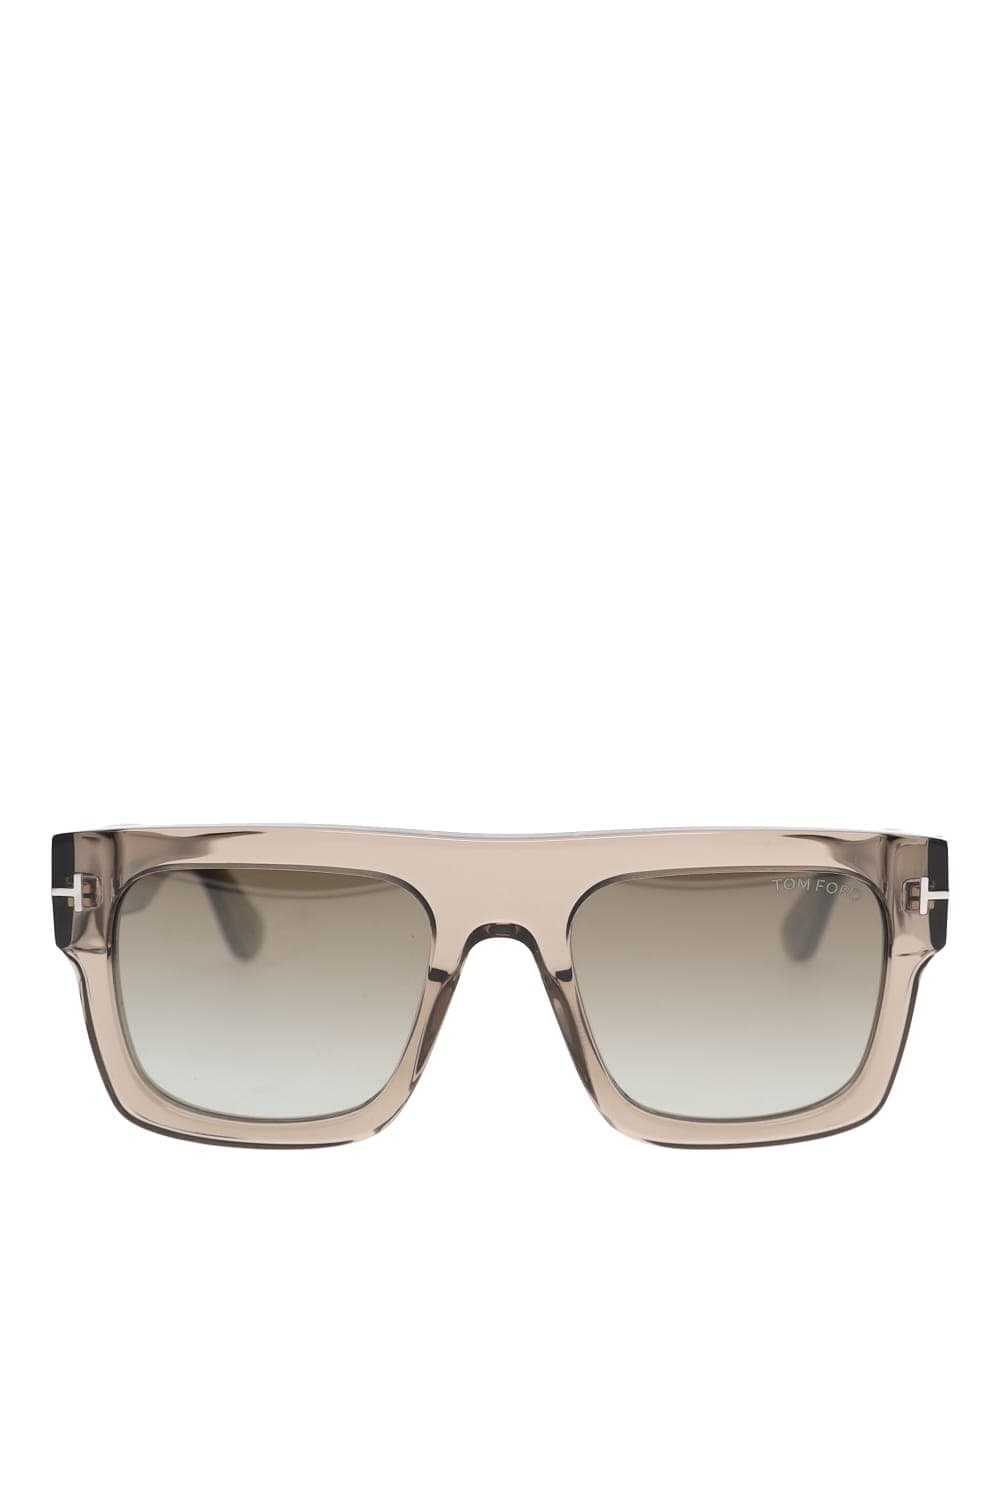 Tom Ford Eyewear FT0711 Shiny Transparent Oyster Sunglasses FT0711 Oyster/Brown